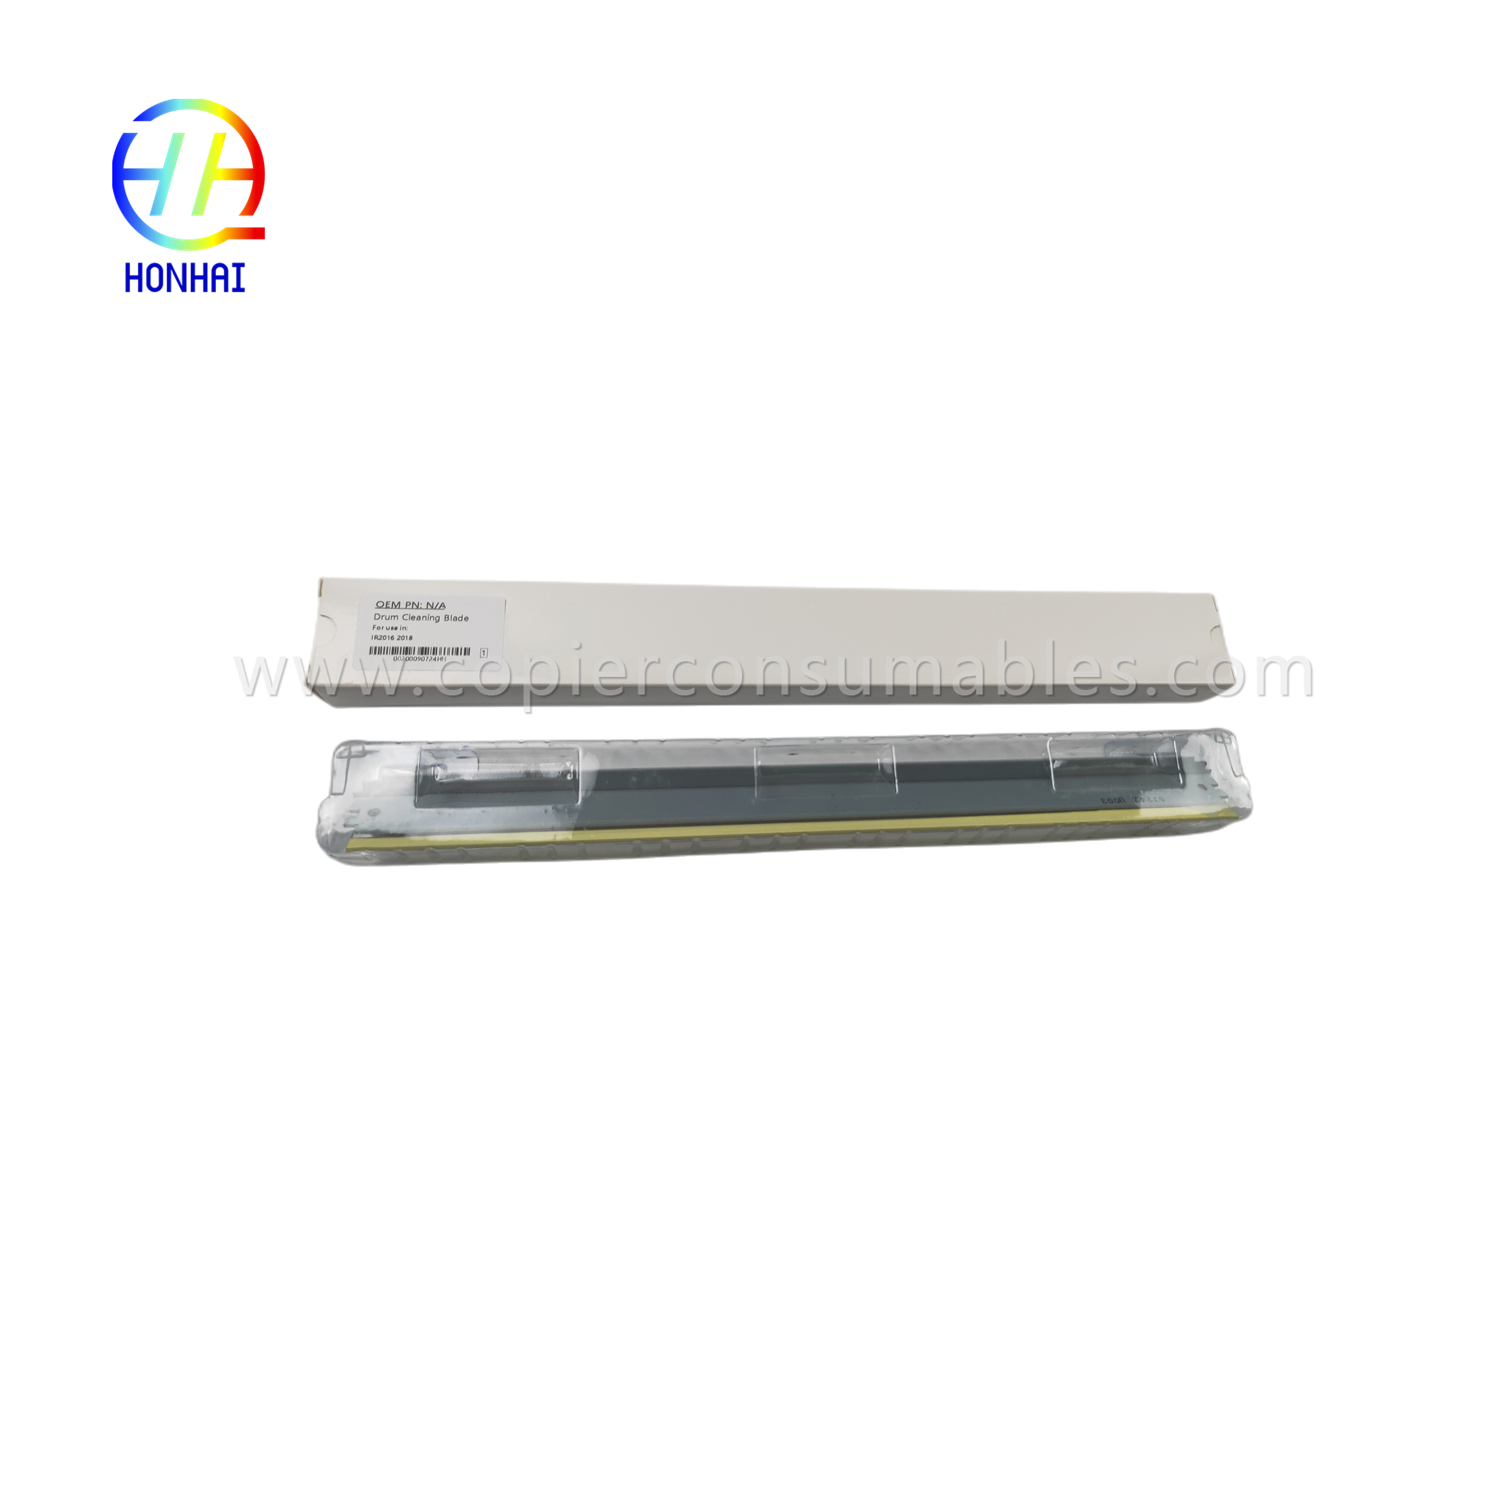 https://c585.goodo.net/drum-cleaning-blade-for-canon-ir1600-1610-2000-2016-2020-2320-ምርት/